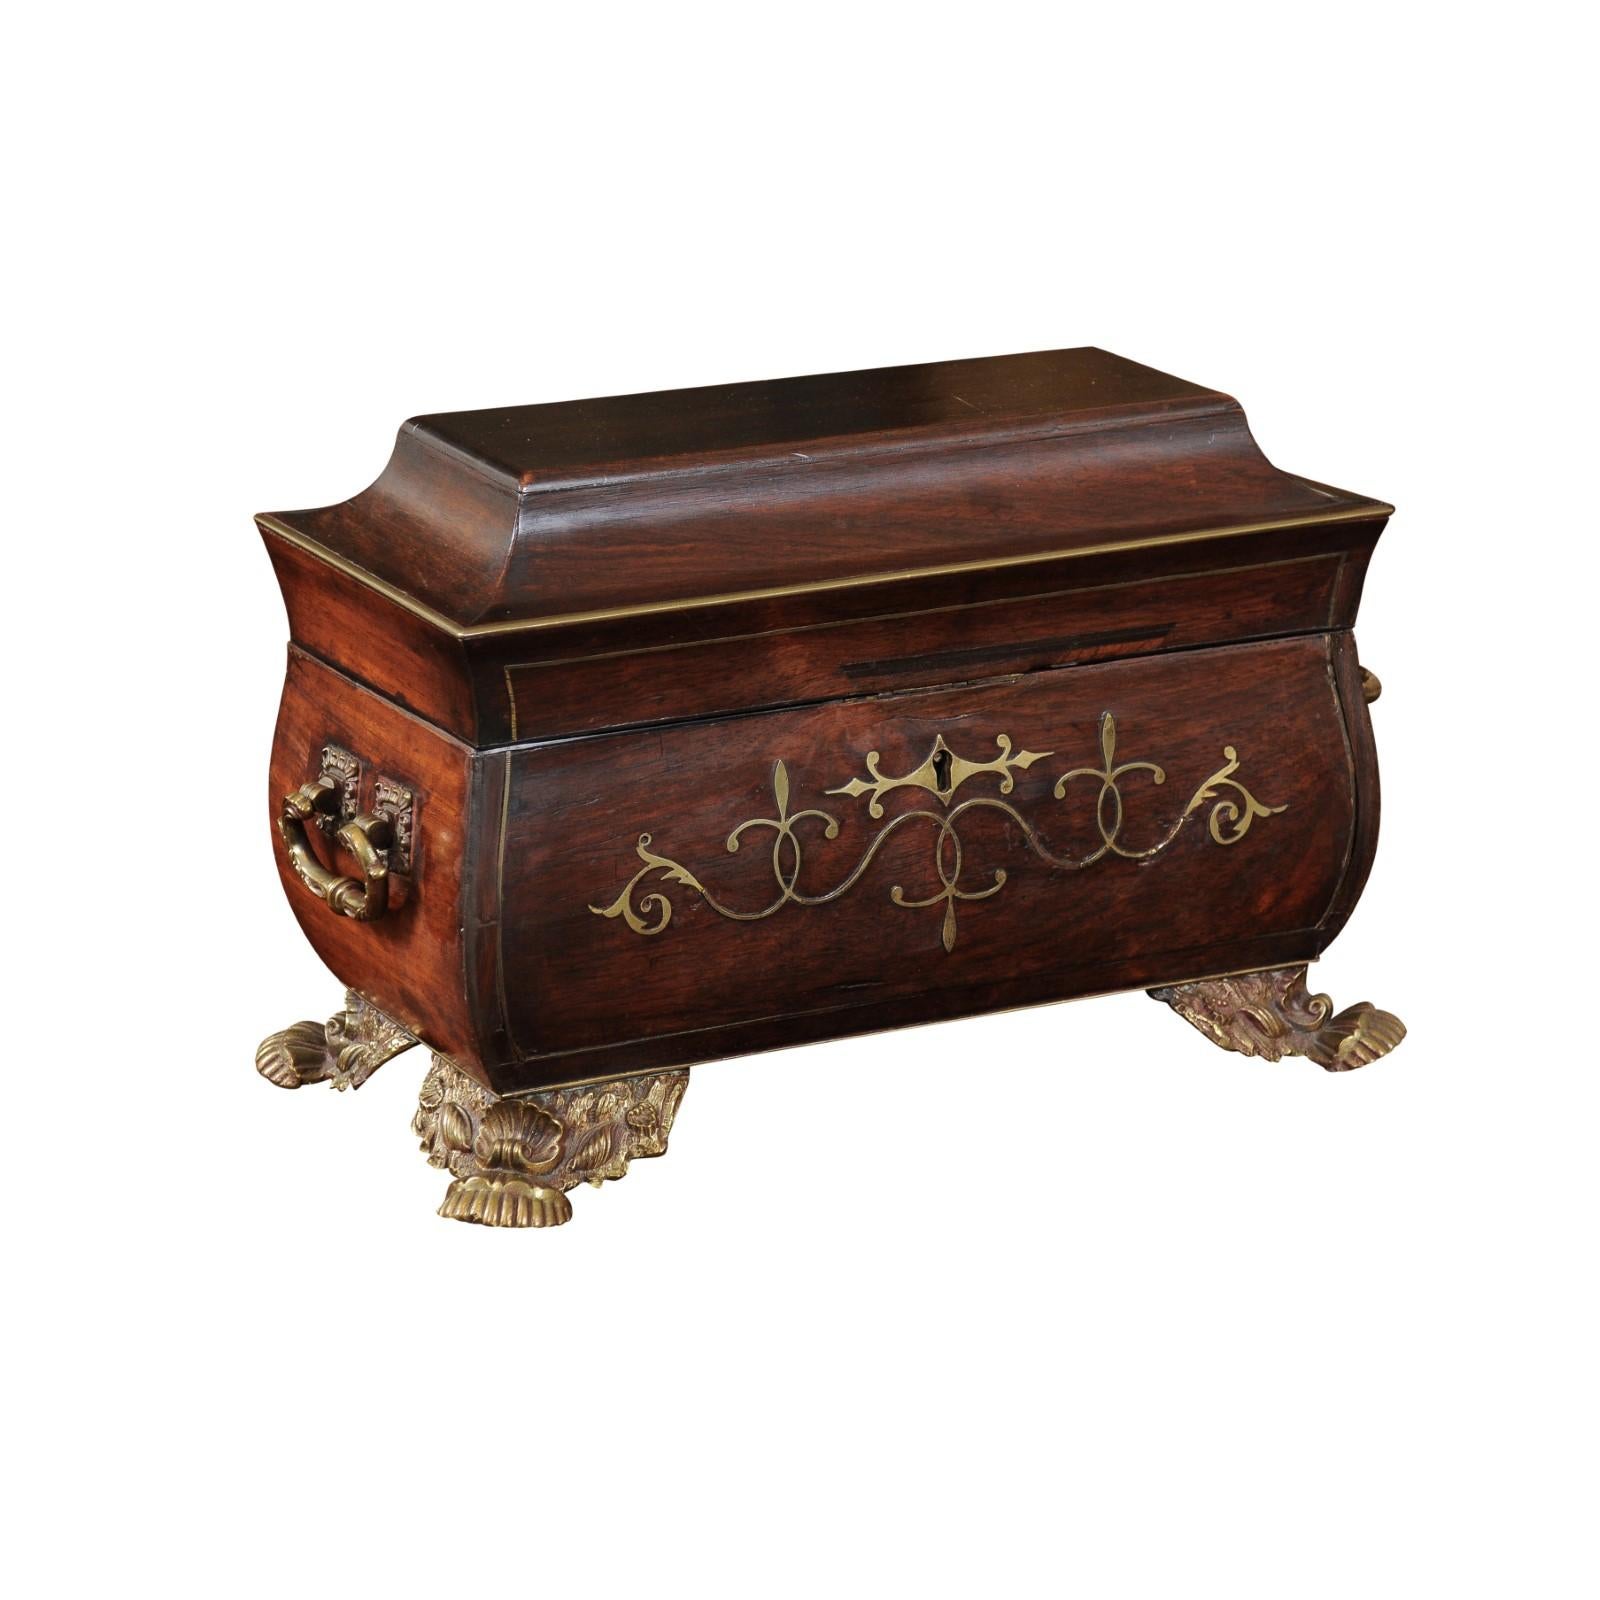 Regency Pagoda Form Work Box with Brass Feet & Inlay, Early 19th Century England For Sale